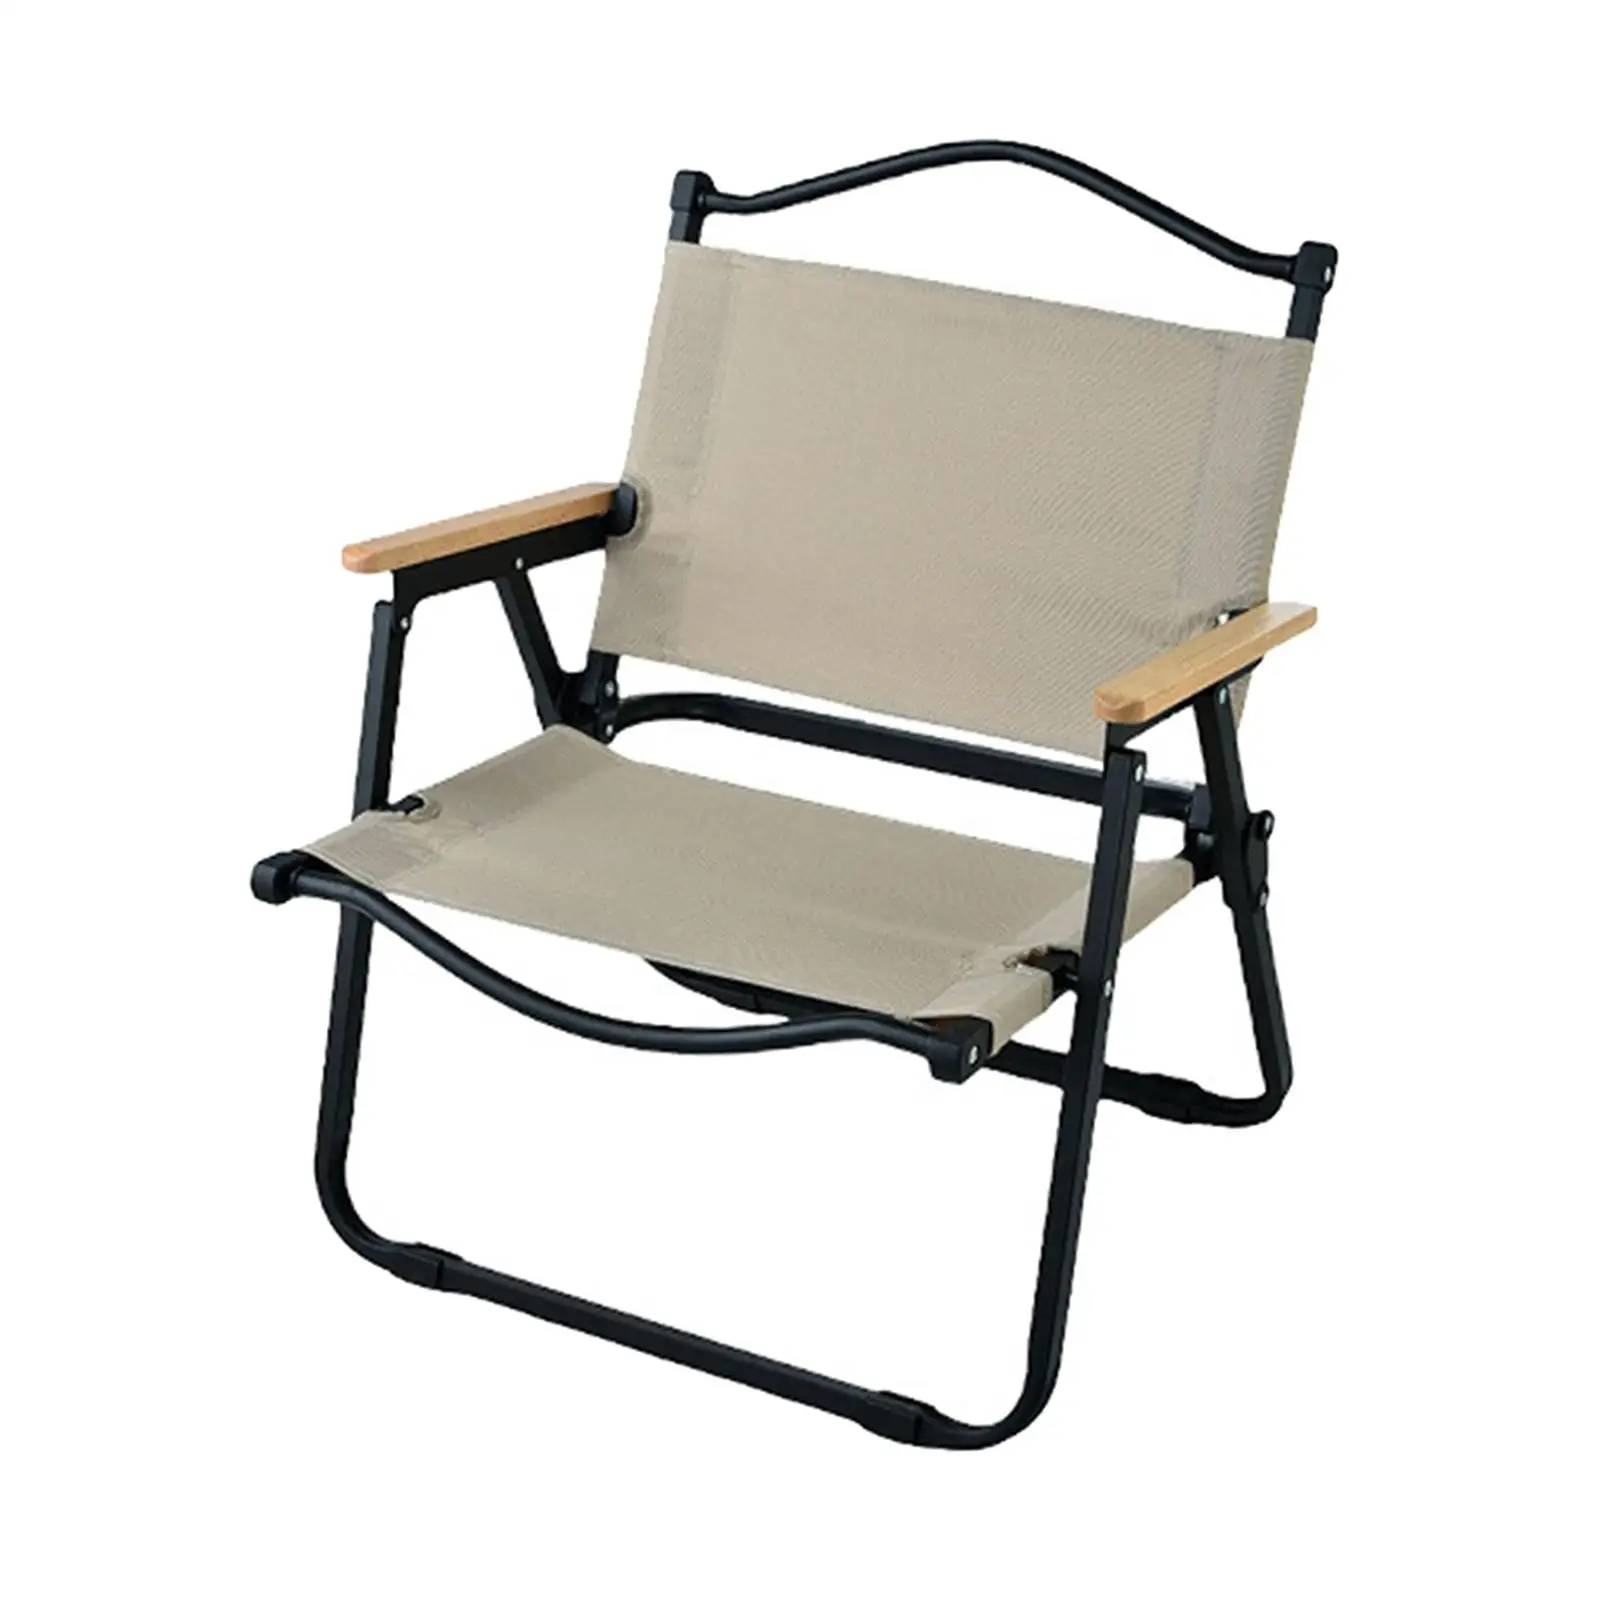 Portable Outdoor Folding Chair Camping Chair Portable Outdoor Lightweight Foldable Chair